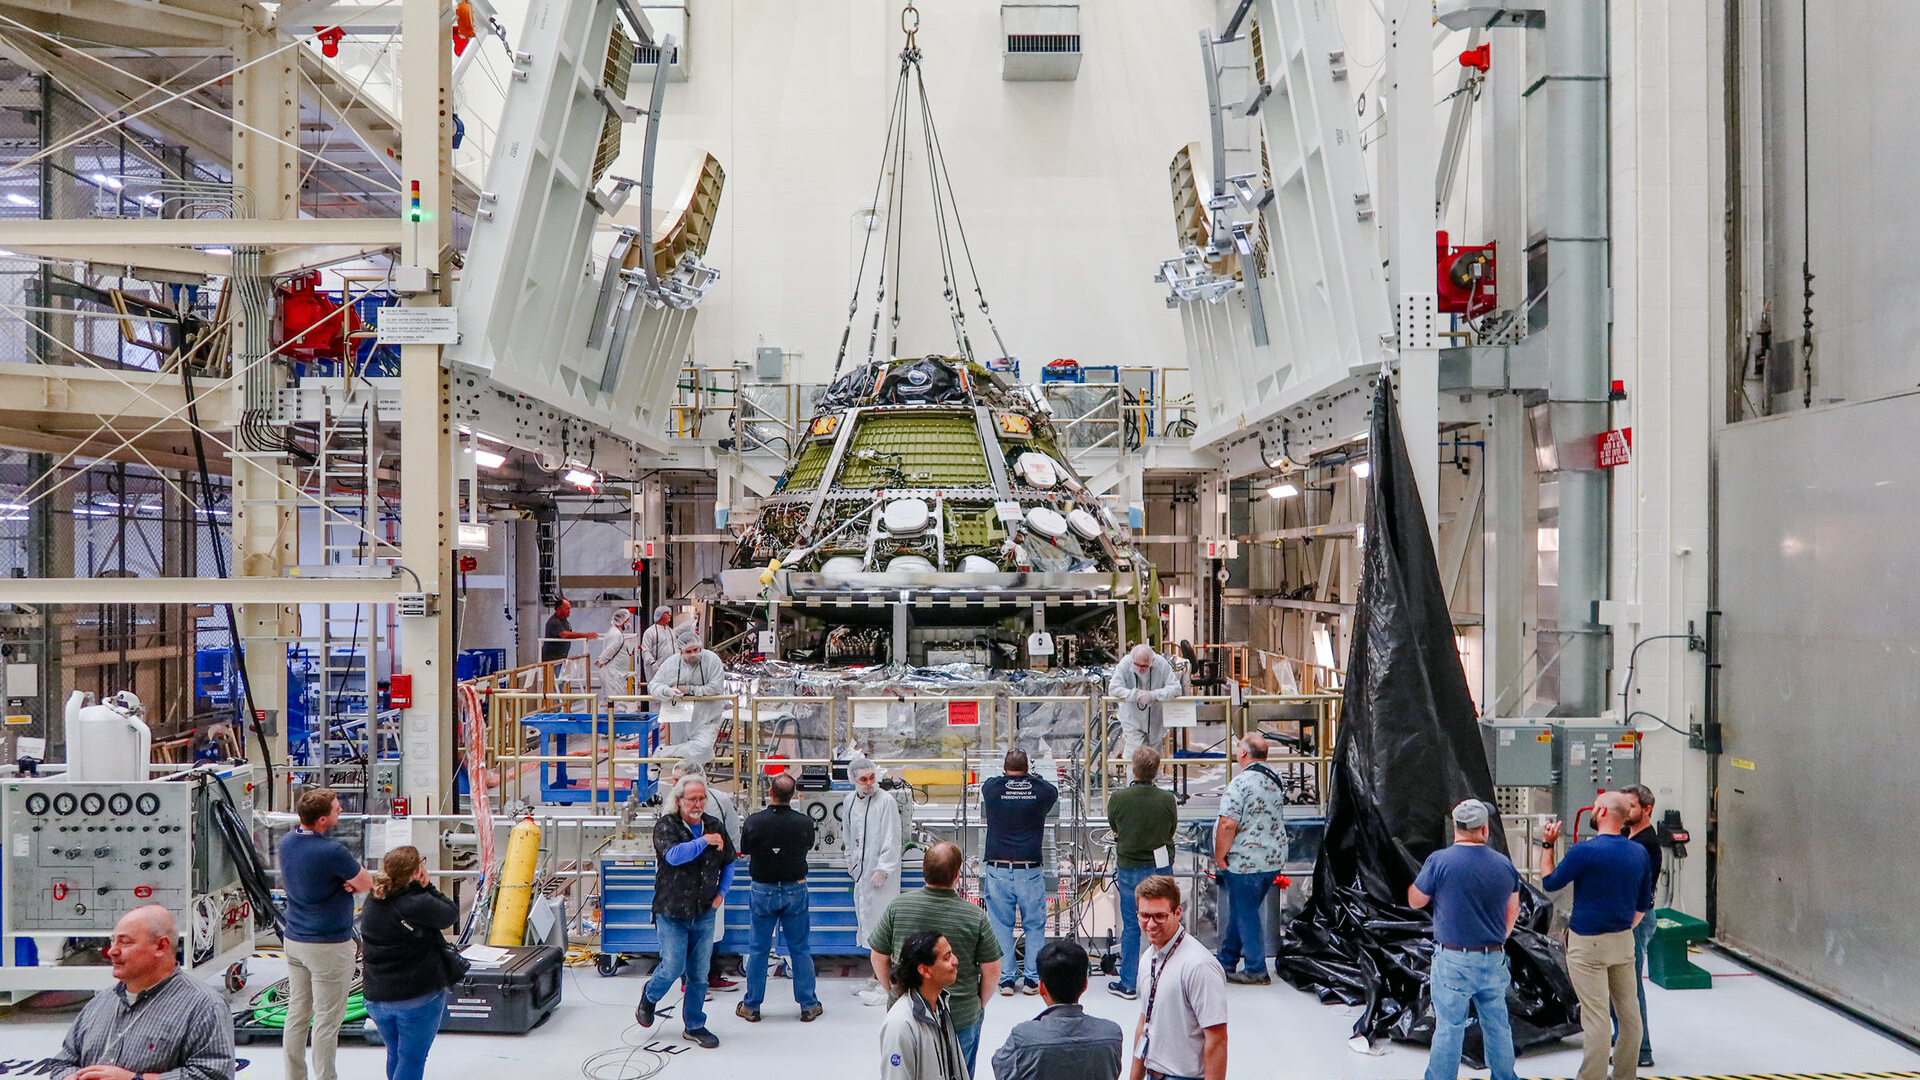 Artemis 2 Orion spacecraft comes together ahead of 2024 moon mission (photos) Space